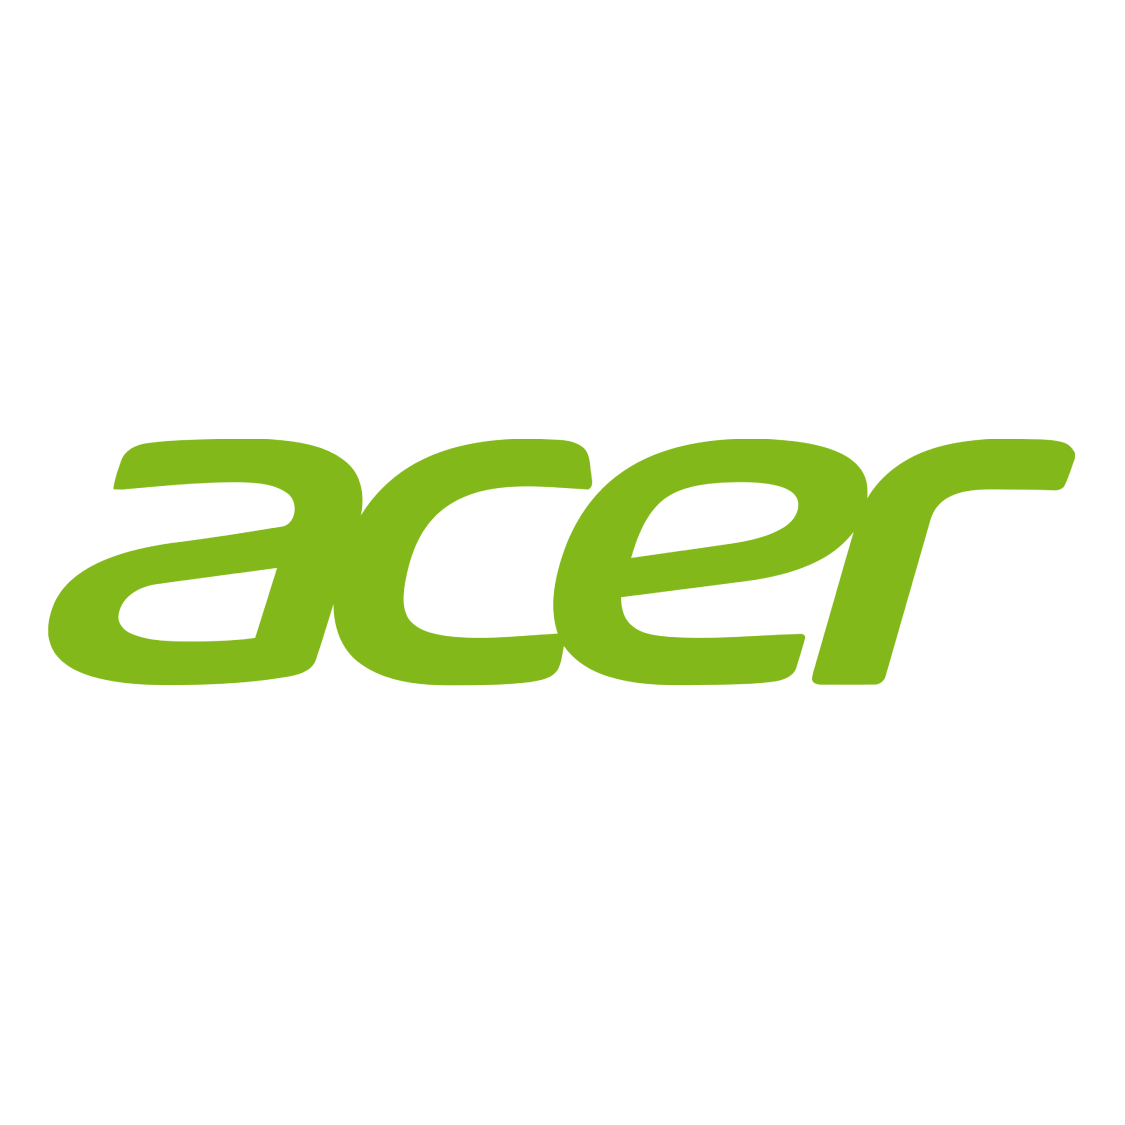 rewards and discounts on Acer UK